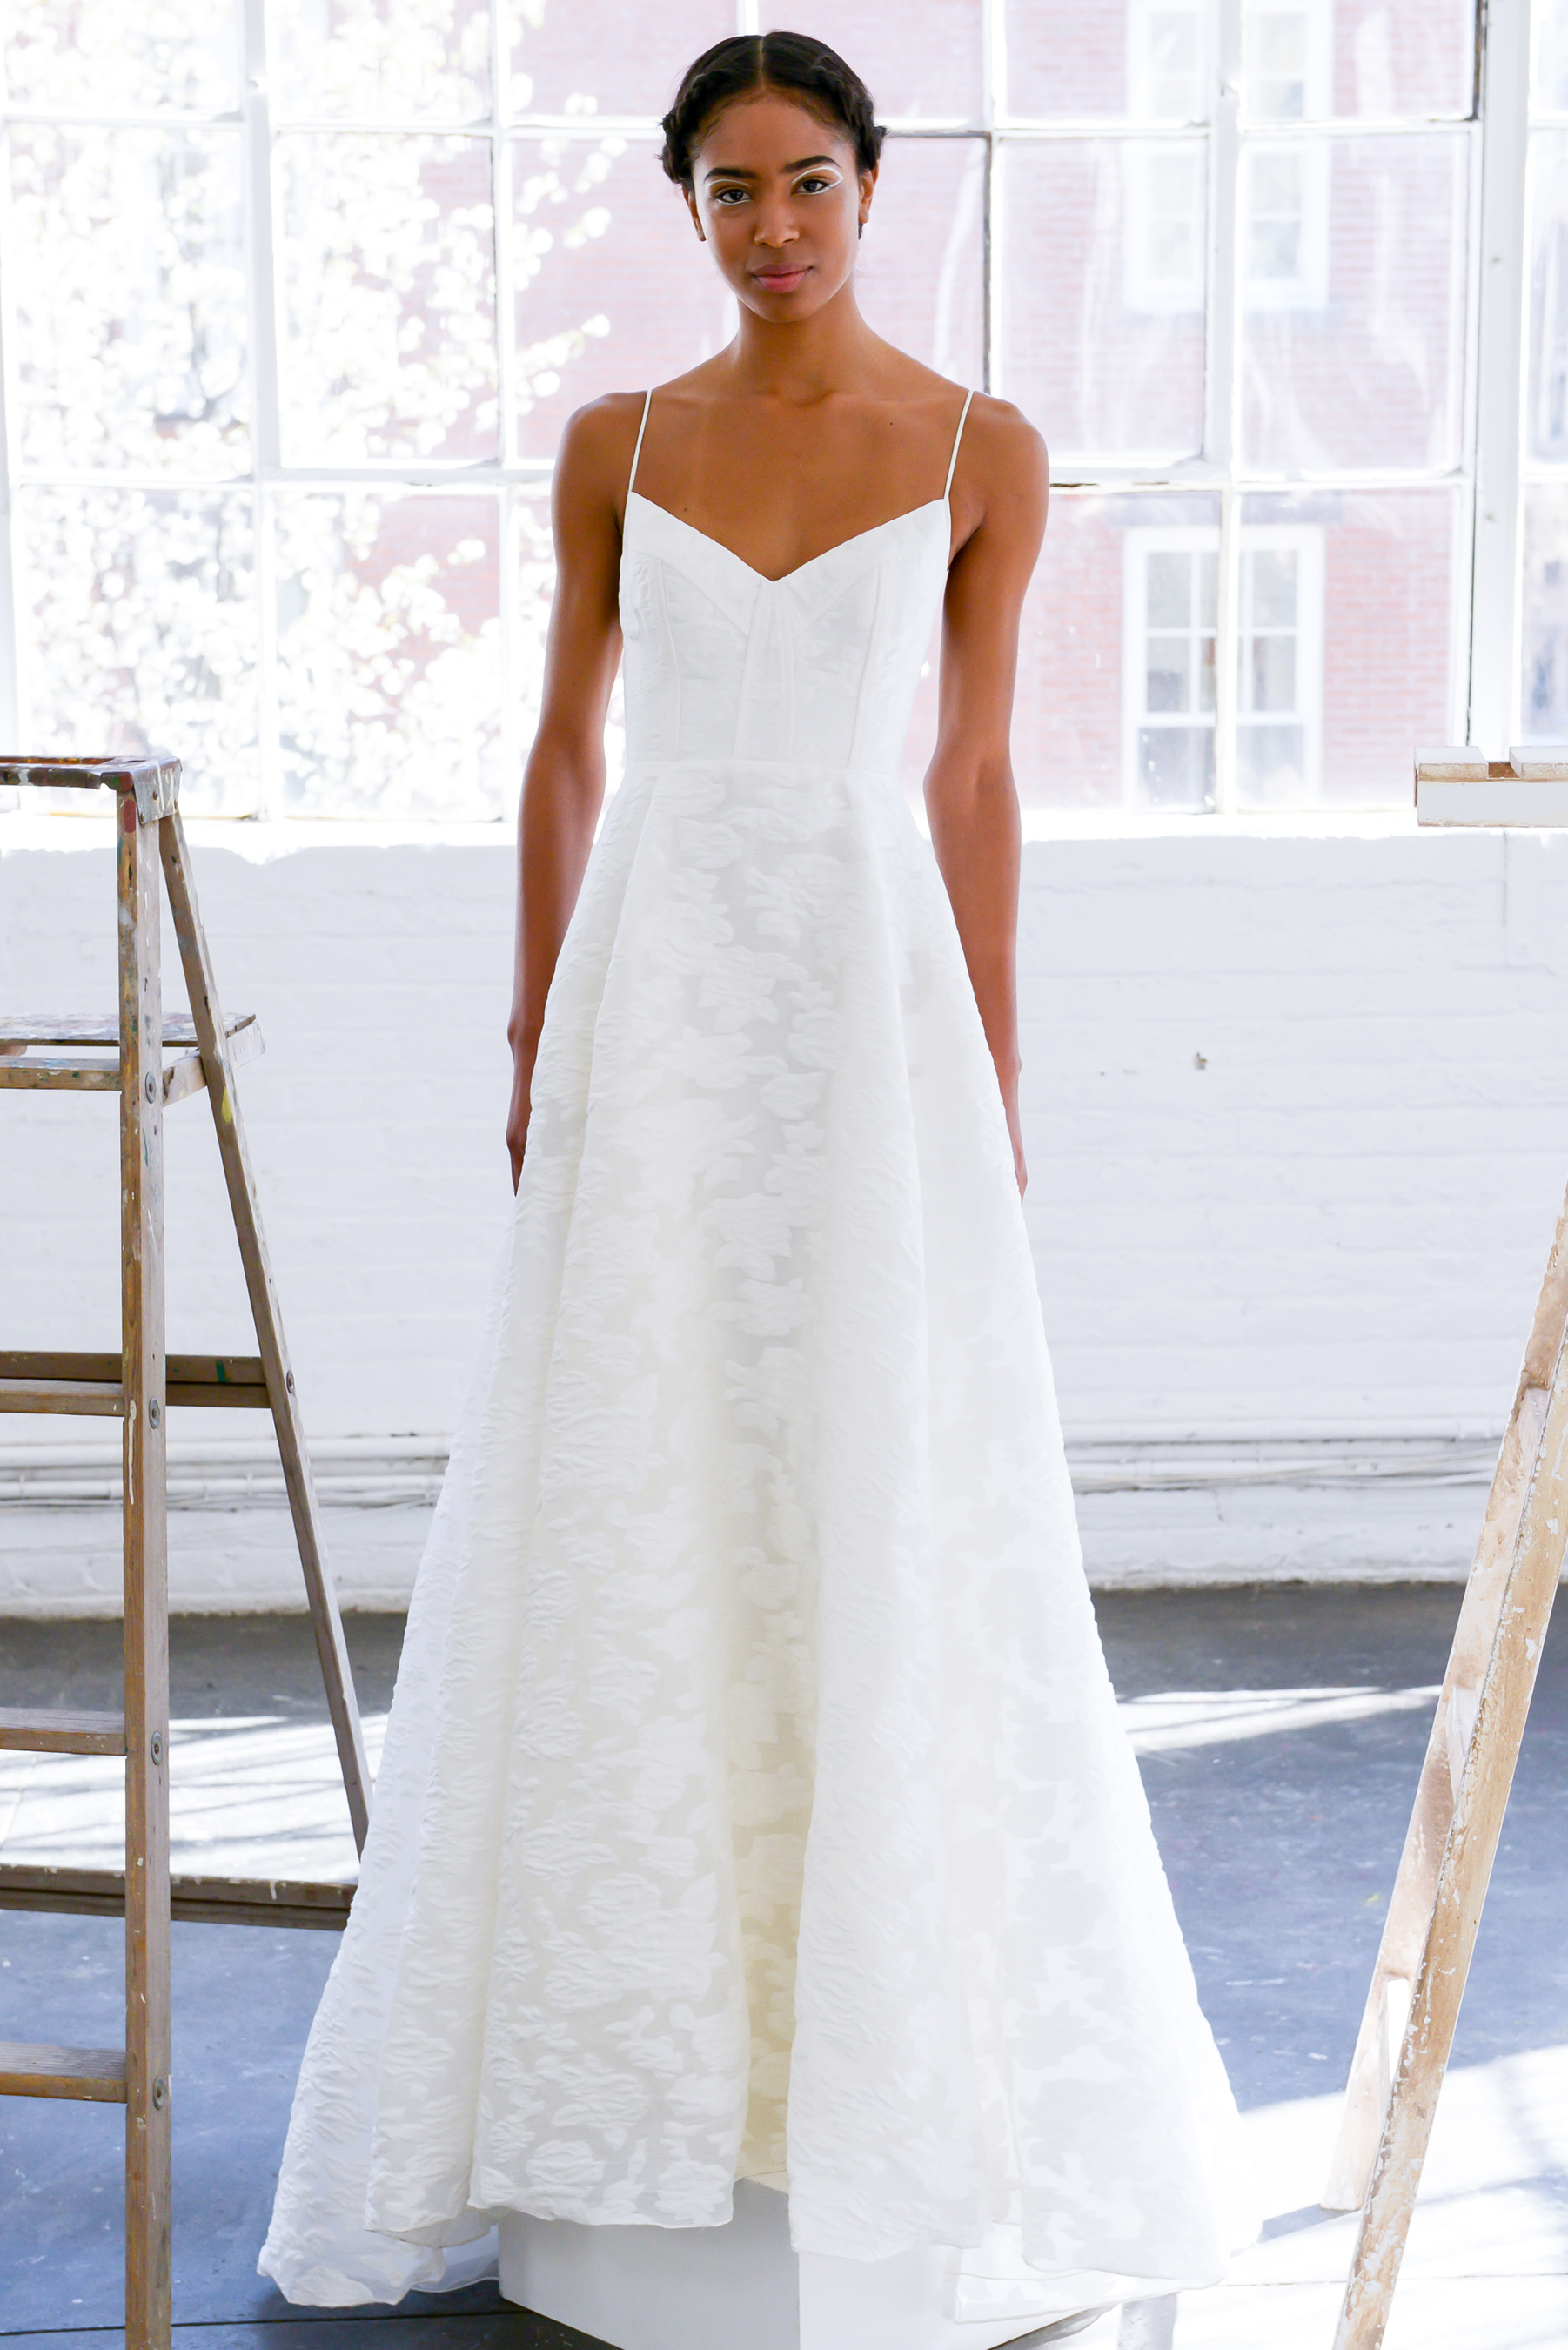 Why simple wedding dresses are popular